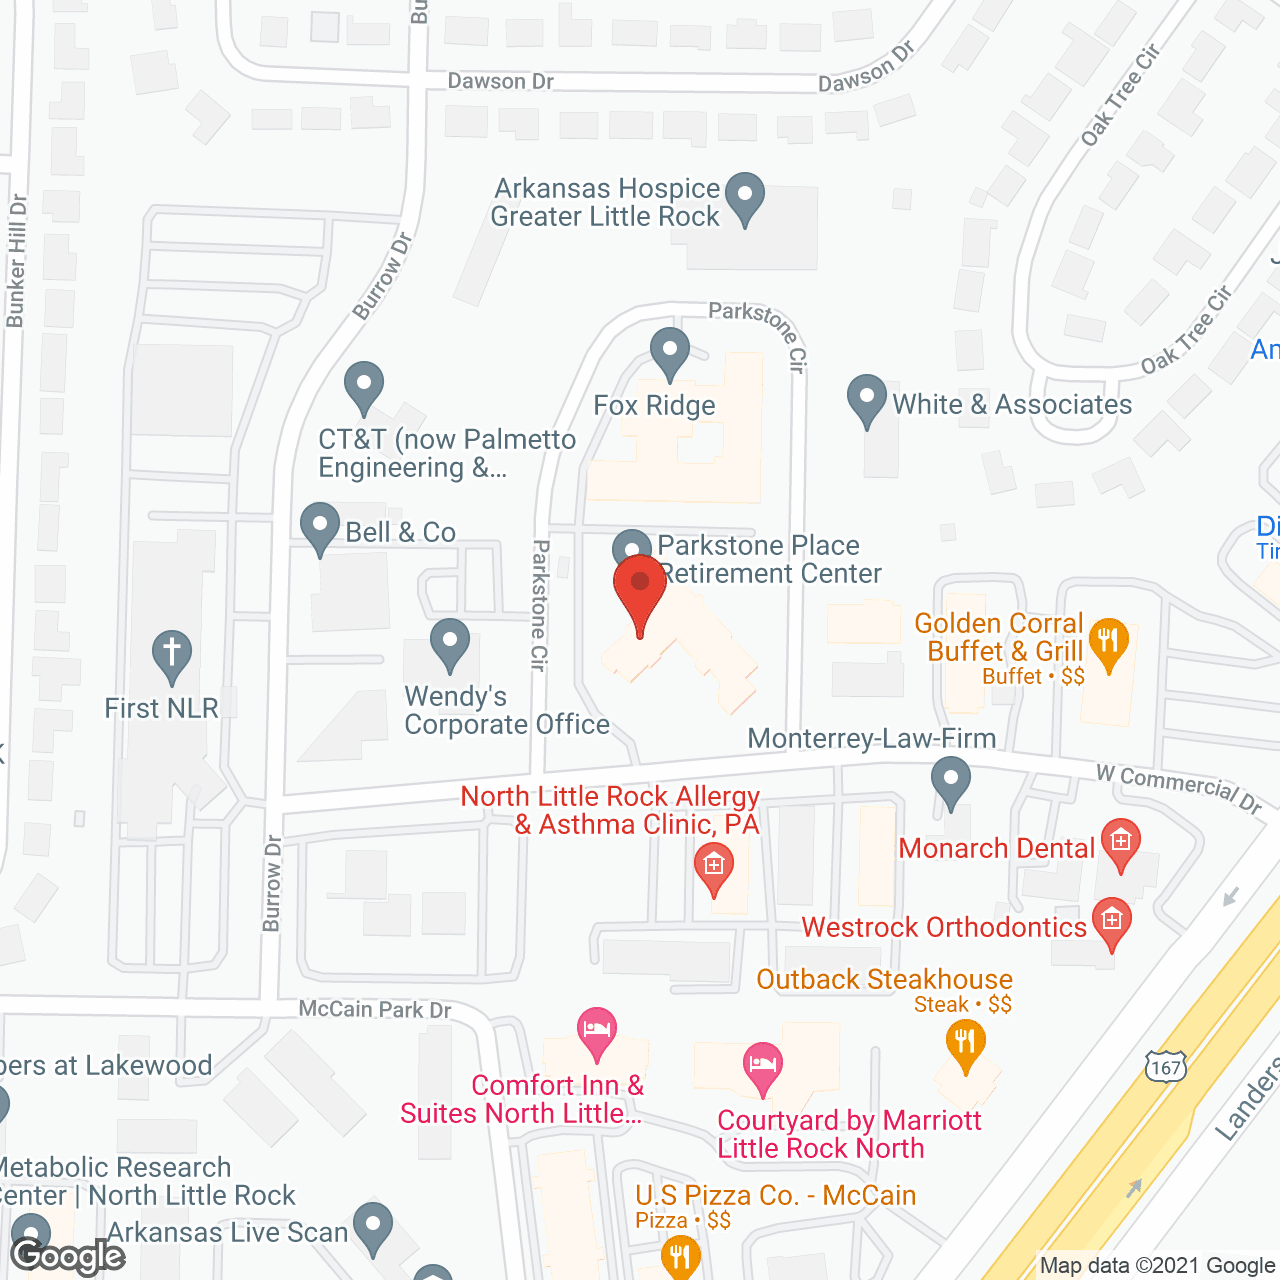 Parkstone Place Retirement Ctr in google map